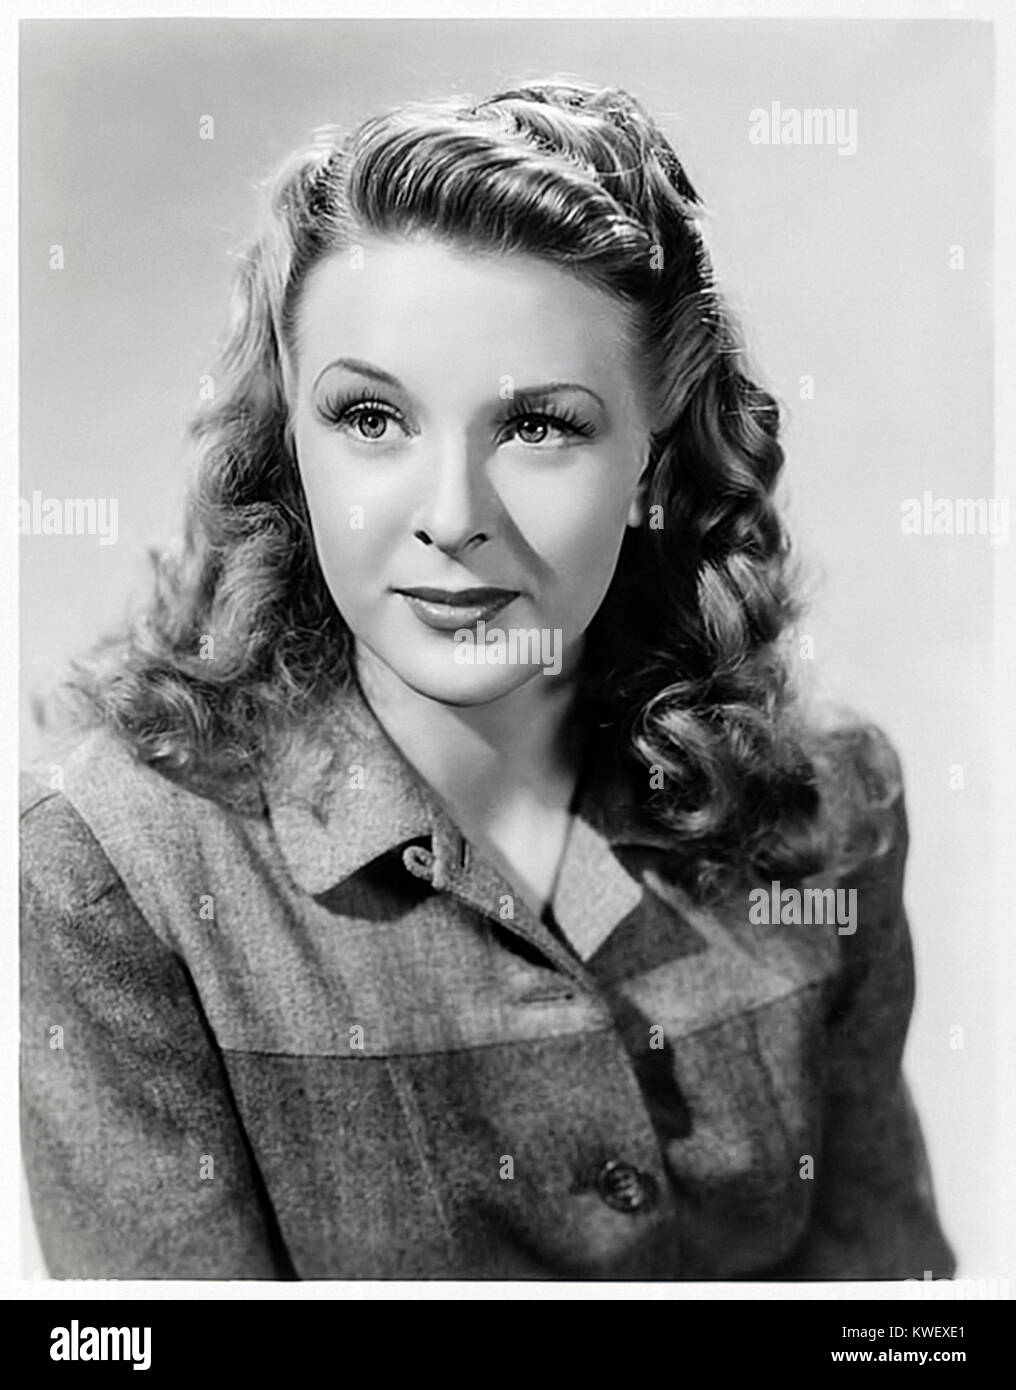 Evelyn Ankers (1918-1985) American actress known as ‘The Queen of the Screamers’ for her roles in Universal Pictures horror films during the 1940s. See more information below. Stock Photo